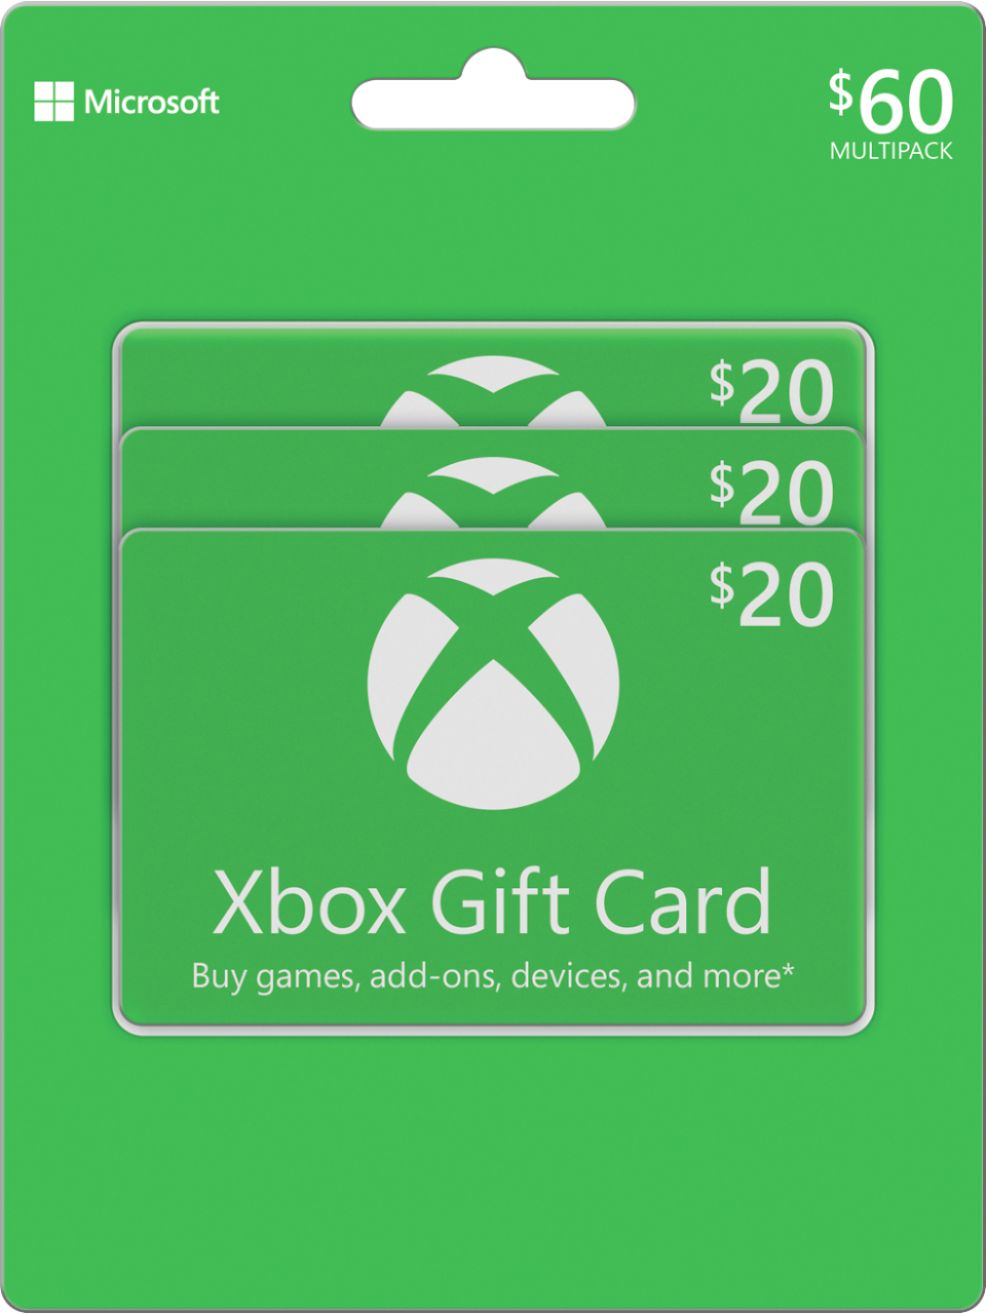 how to check if xbox gift card is valid